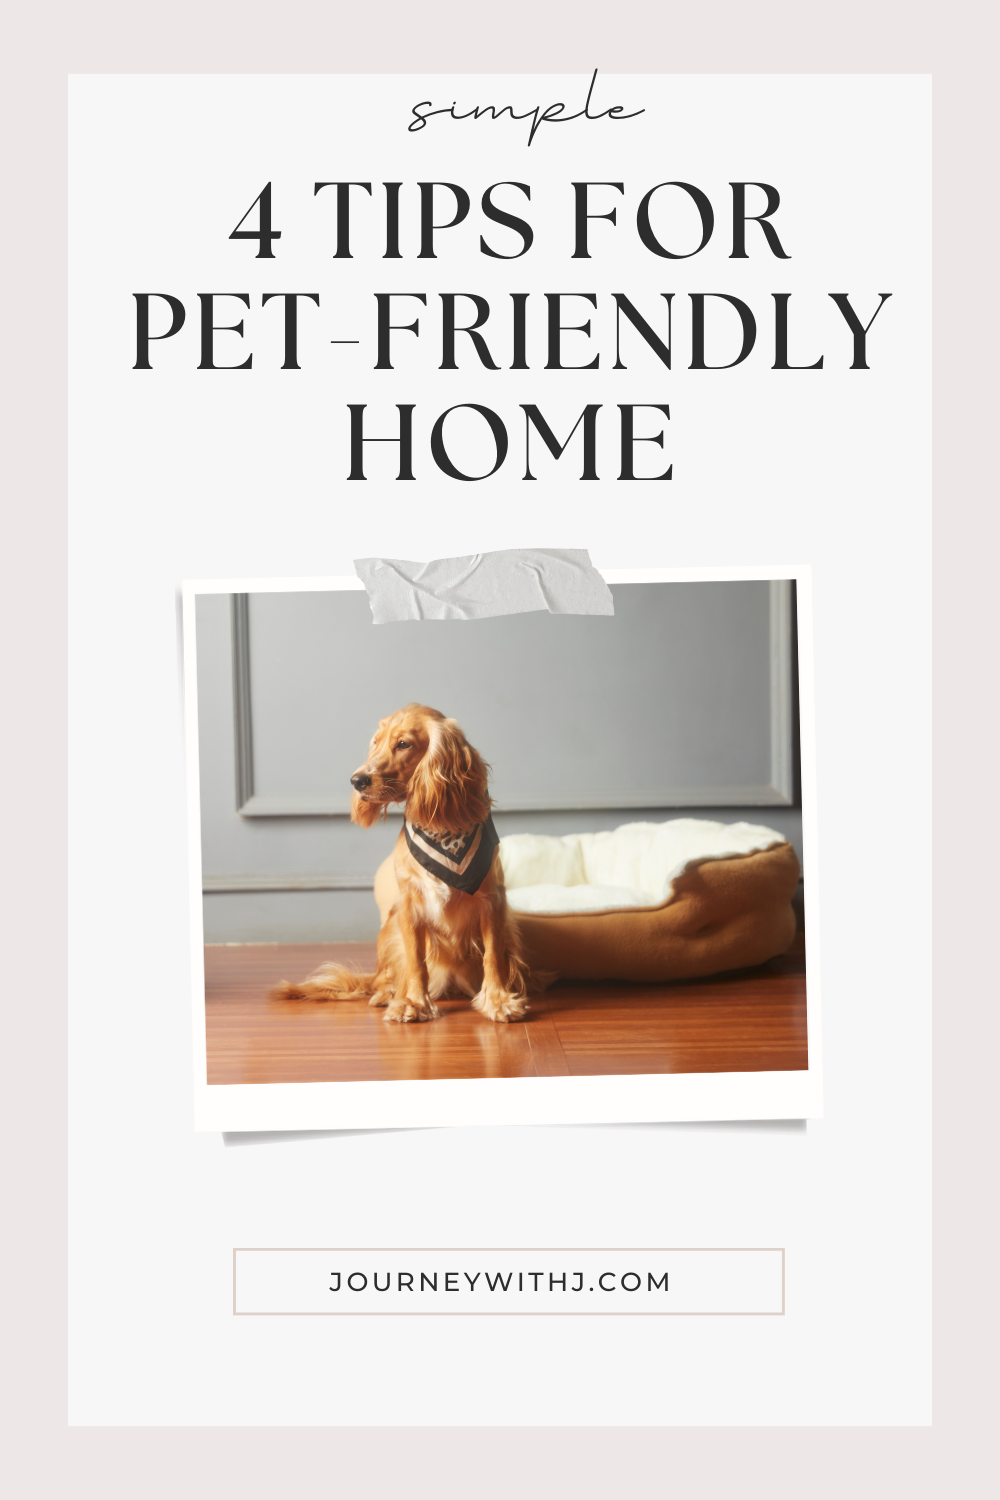 4 Tips for pet-friendly home